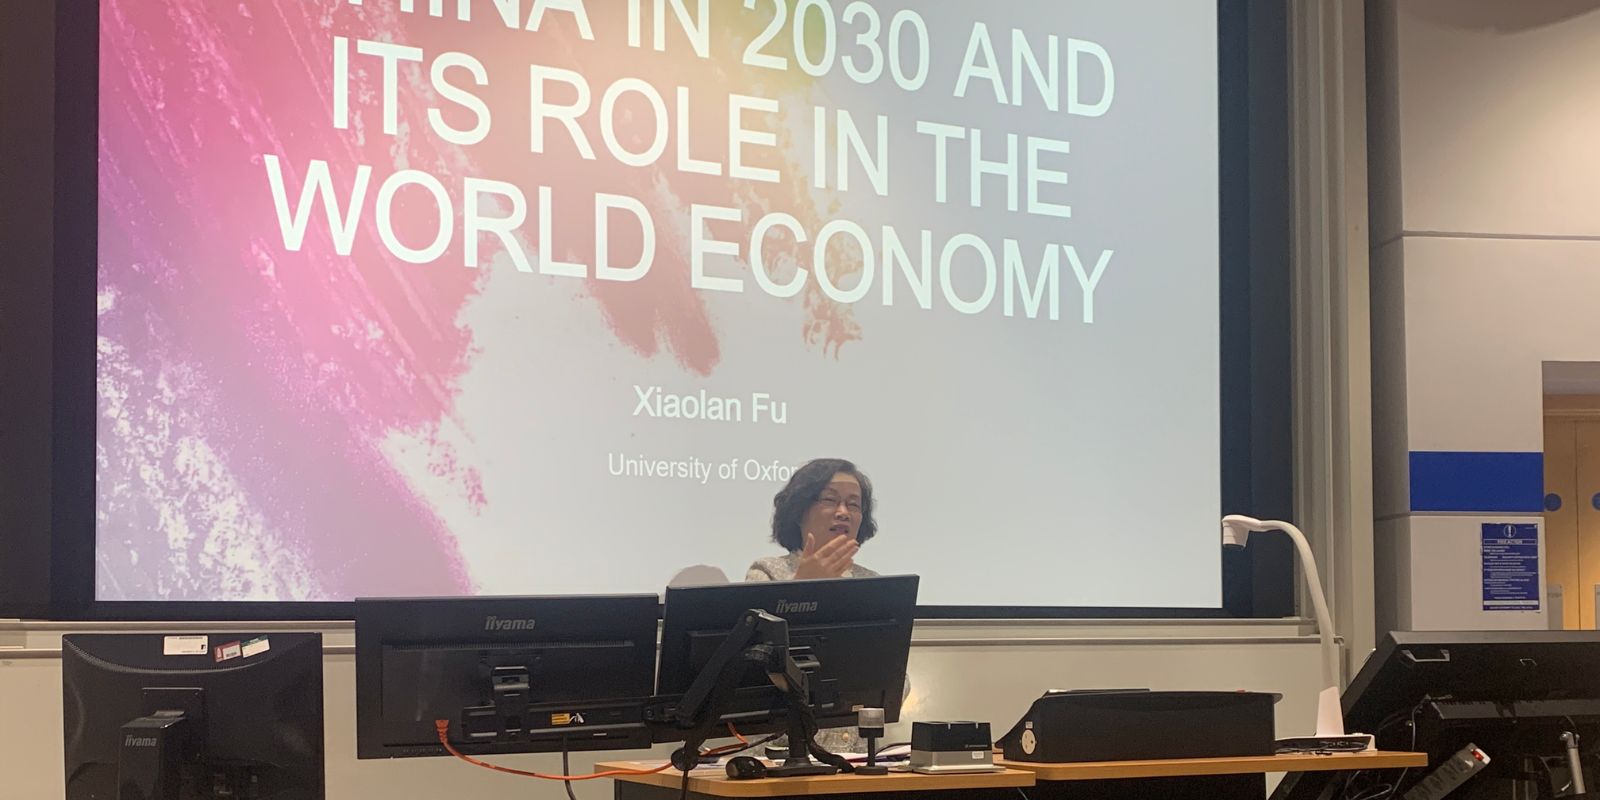 A woman standing behind a lectern. A title slide behind her reads Xiaolan Fu, University of Oxford.